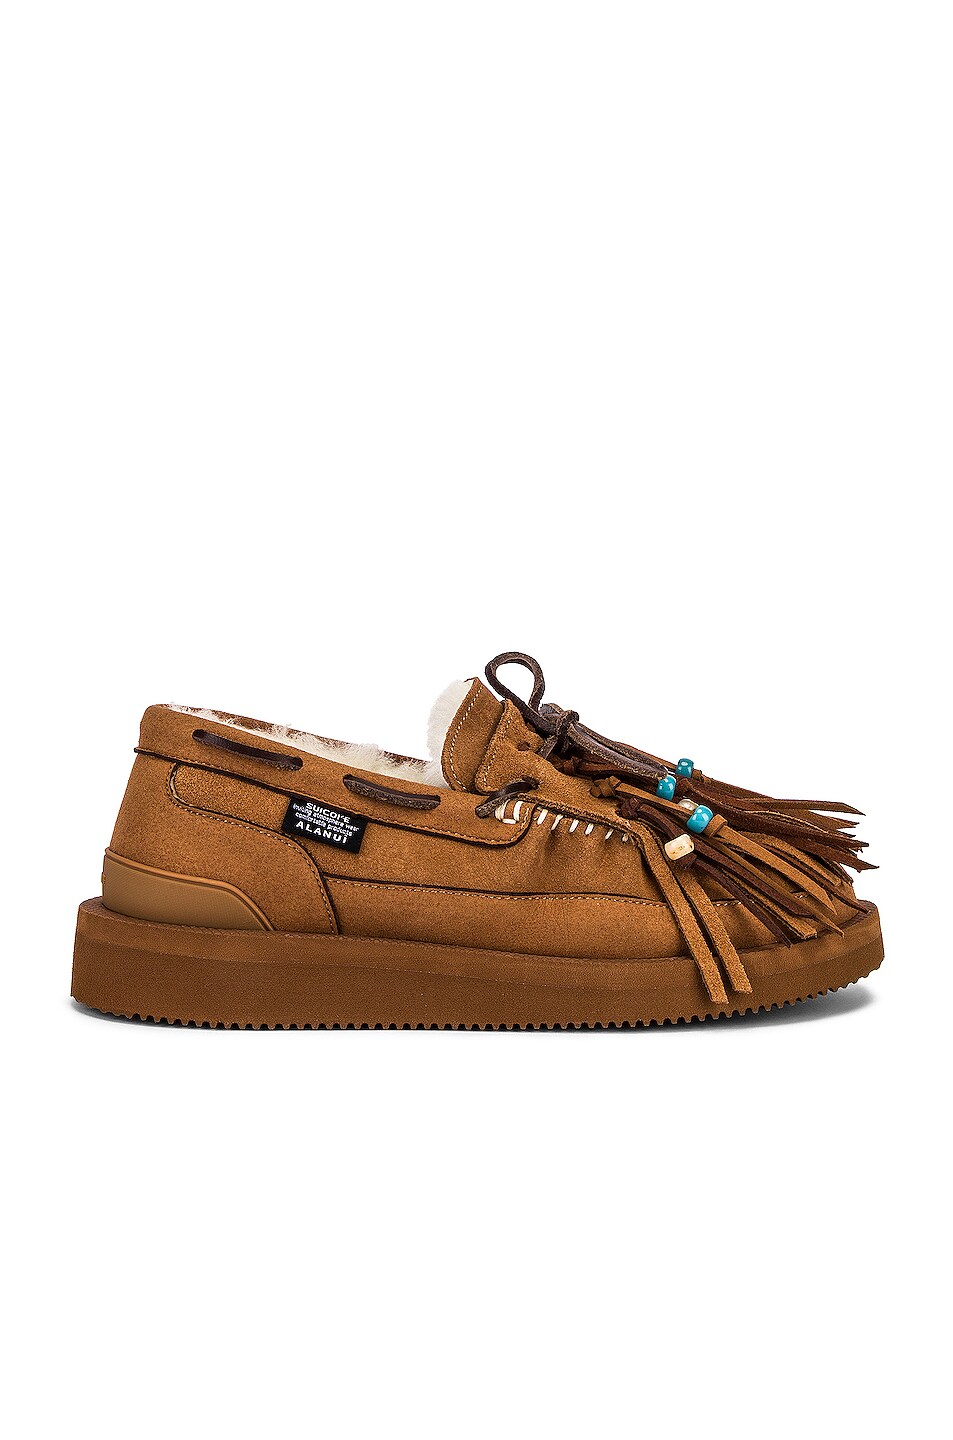 Image 1 of ALANUI OWM Suicoke Loafers in Sugar Brown